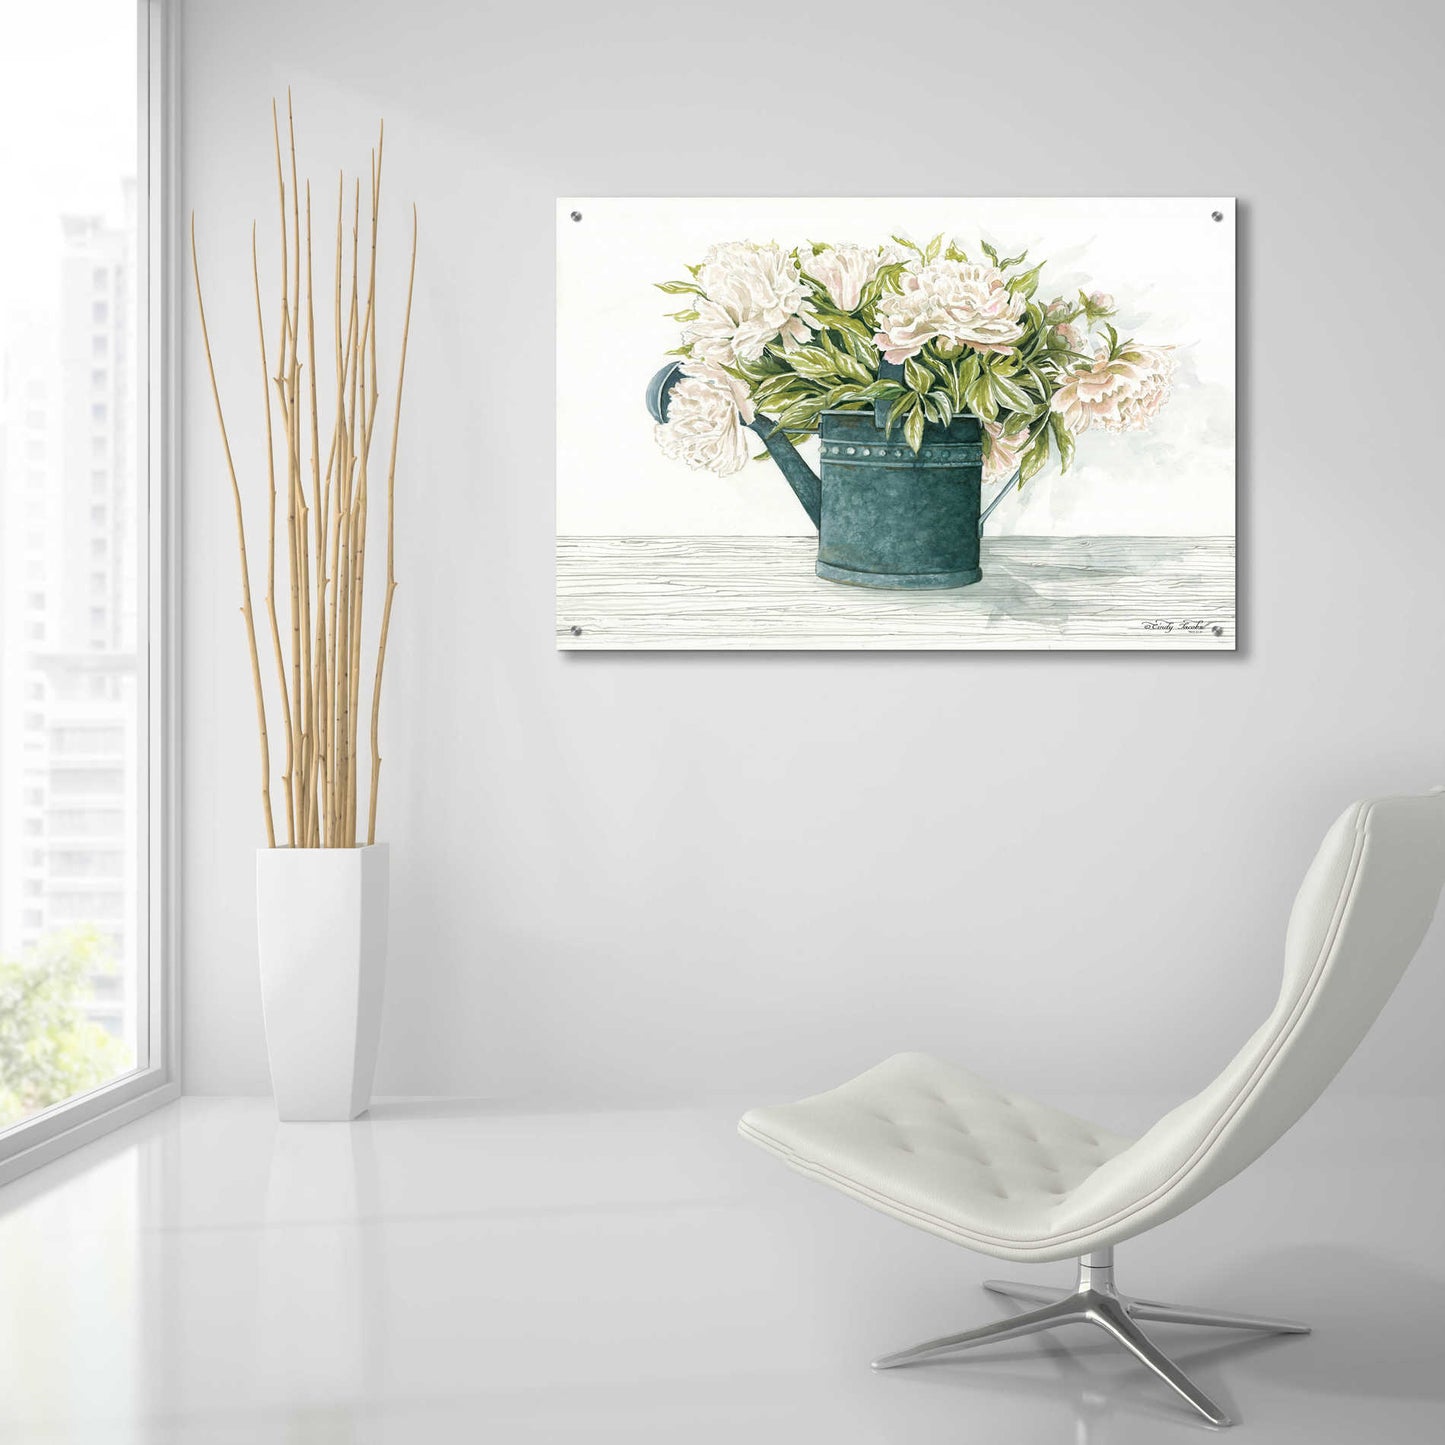 Epic Art 'Galvanized Watering Can Peonies' by Cindy Jacobs, Acrylic Glass Wall Art,36x24